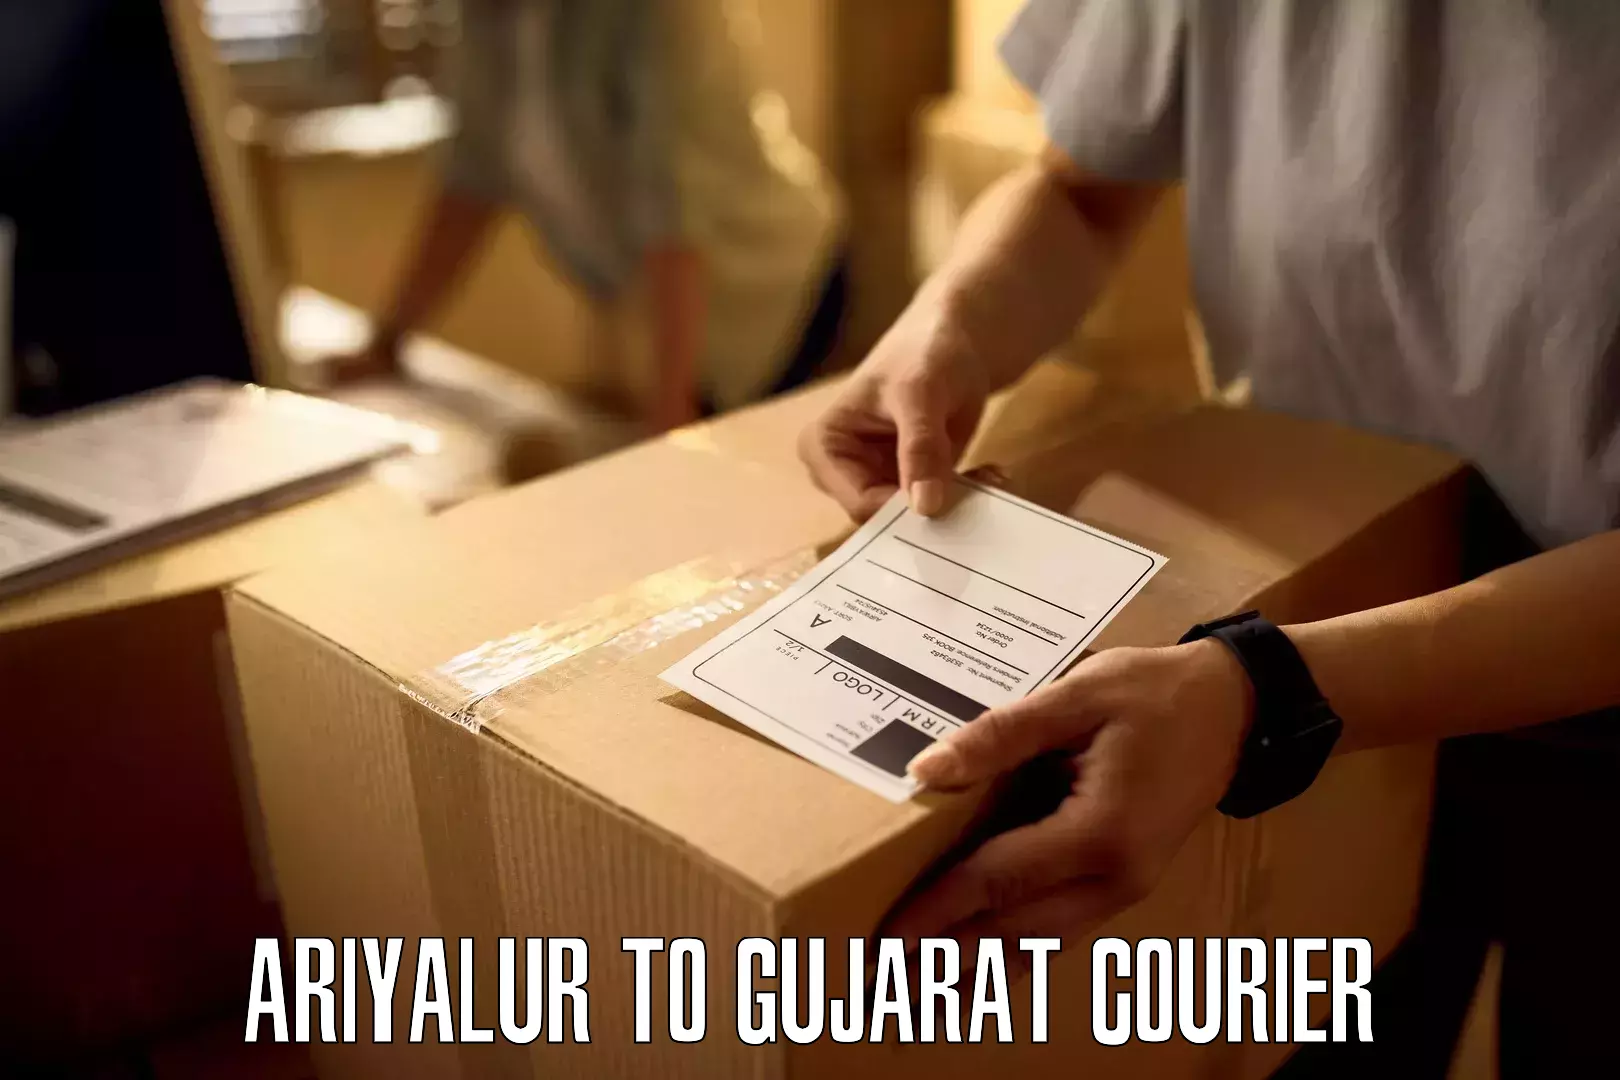 Personal courier services Ariyalur to Dharmaram